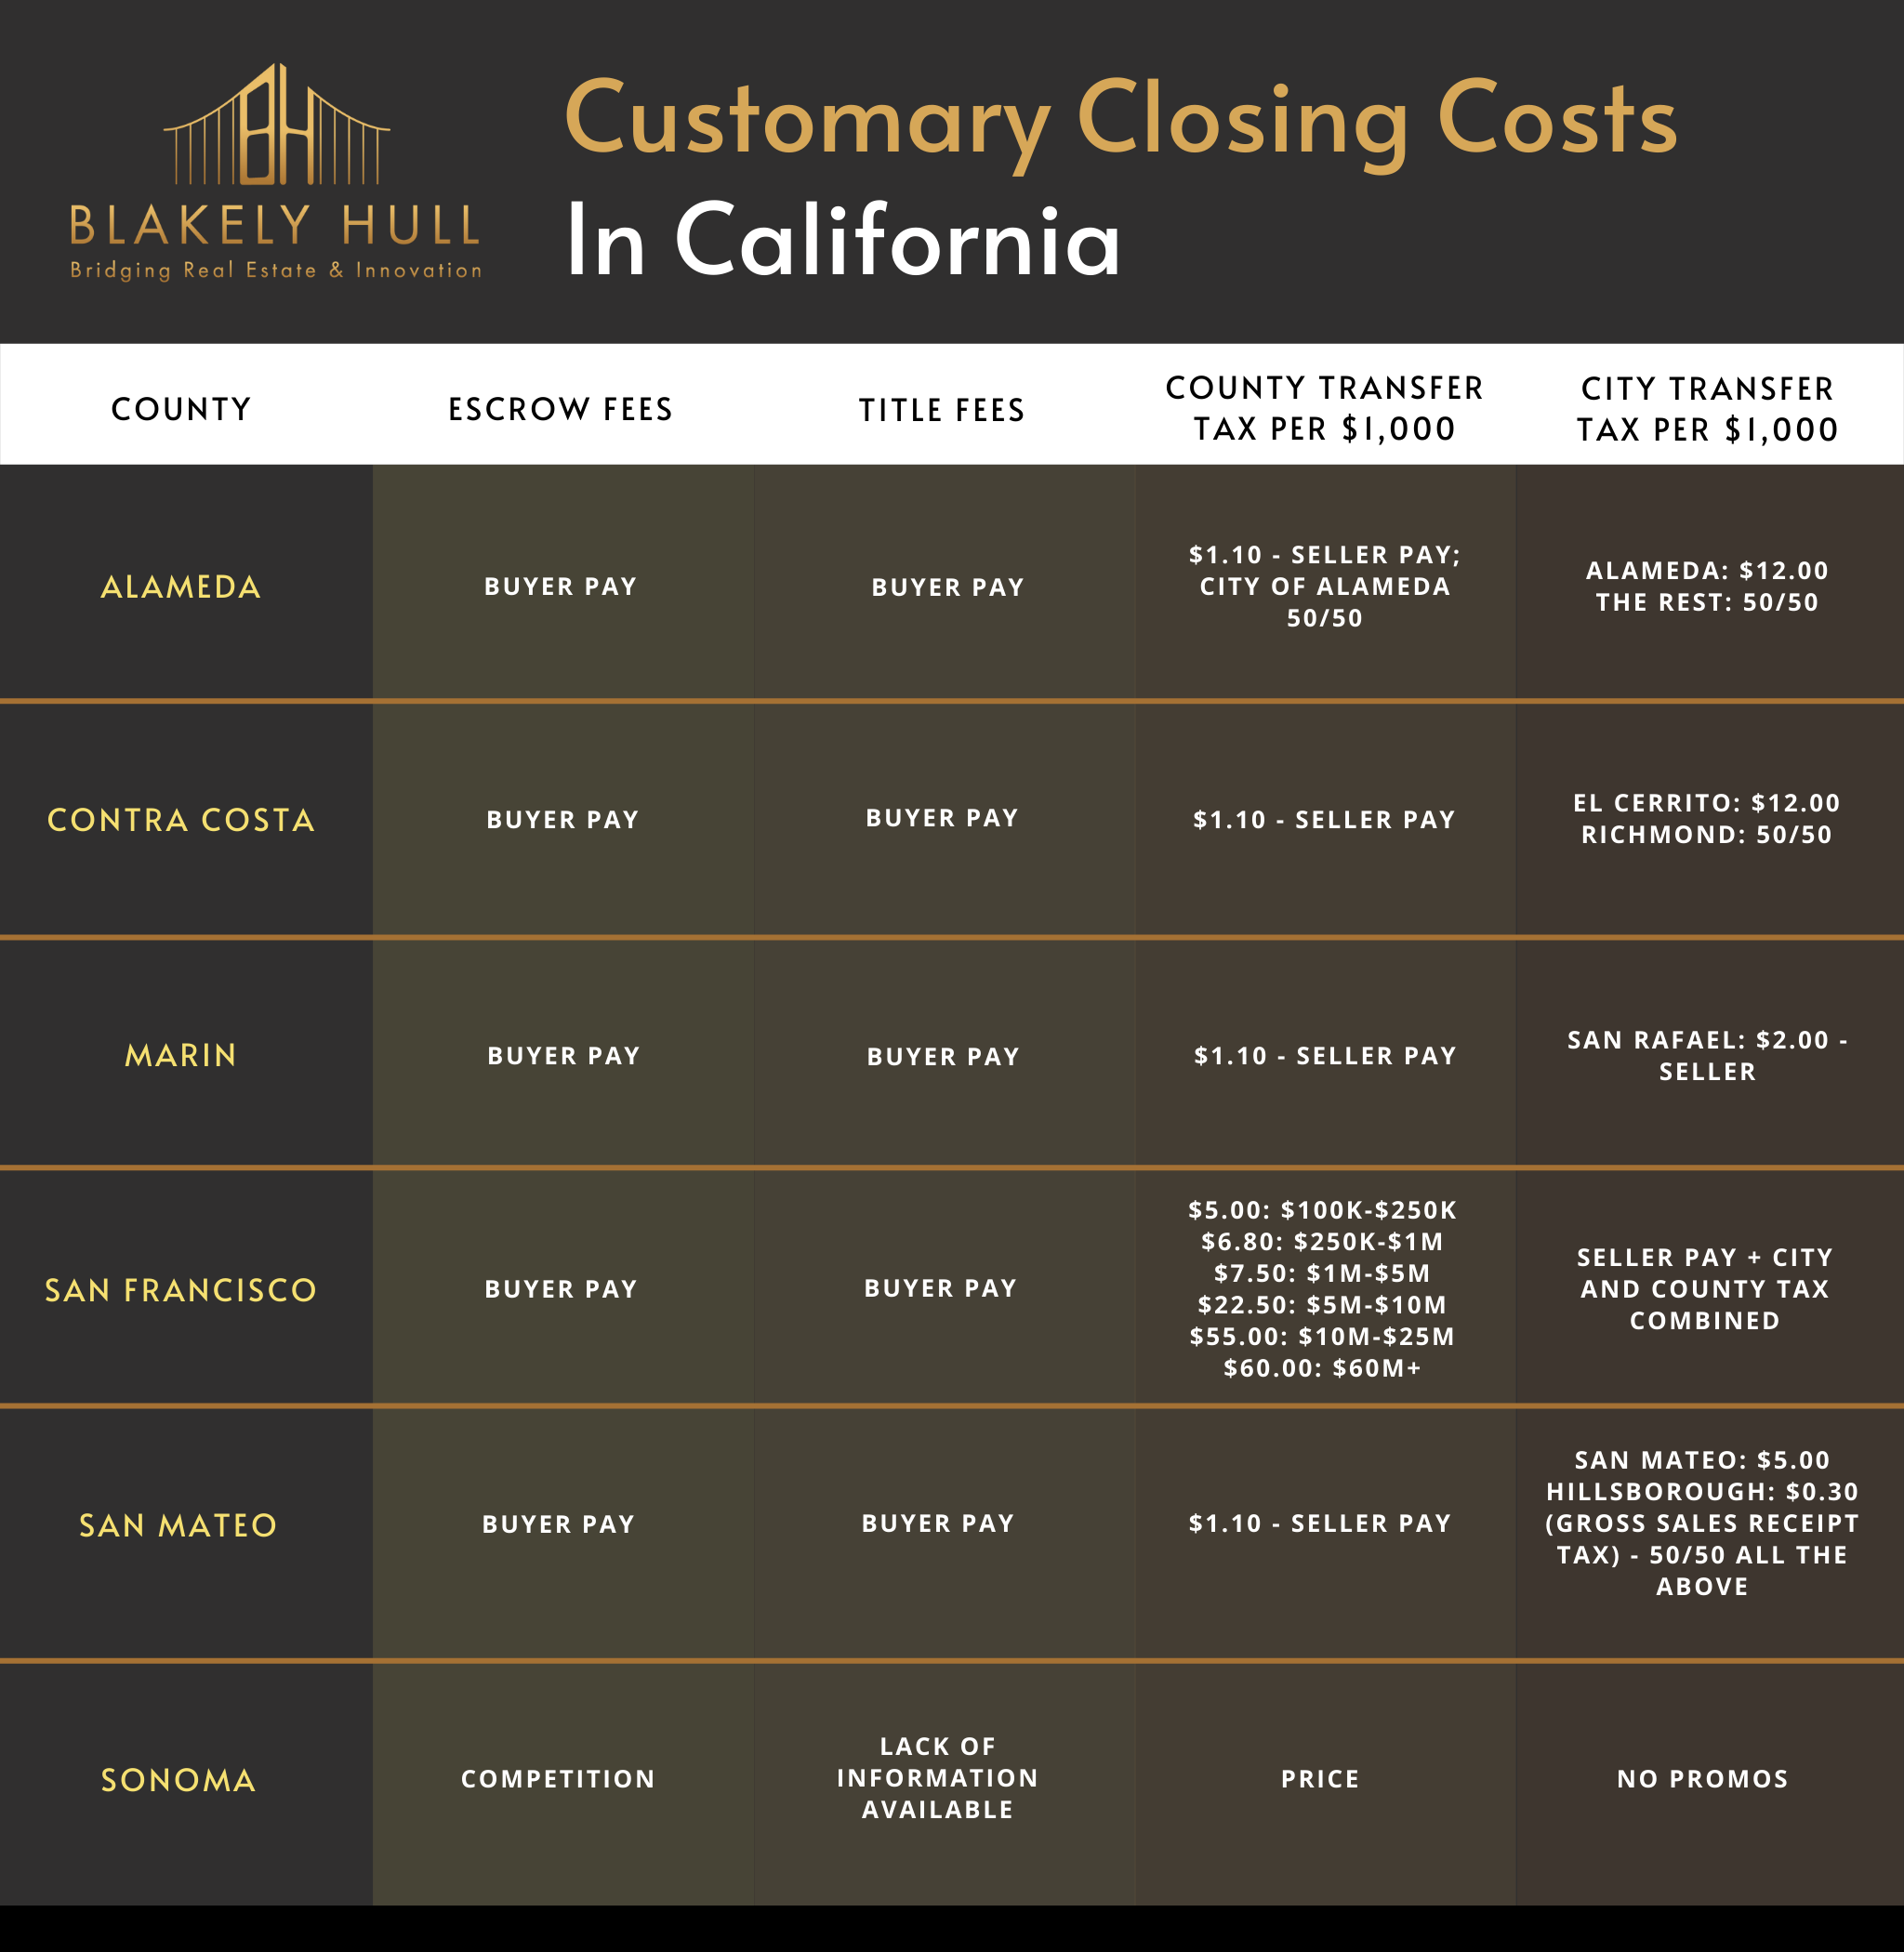 Customary Closing Costs In California (Med Res)